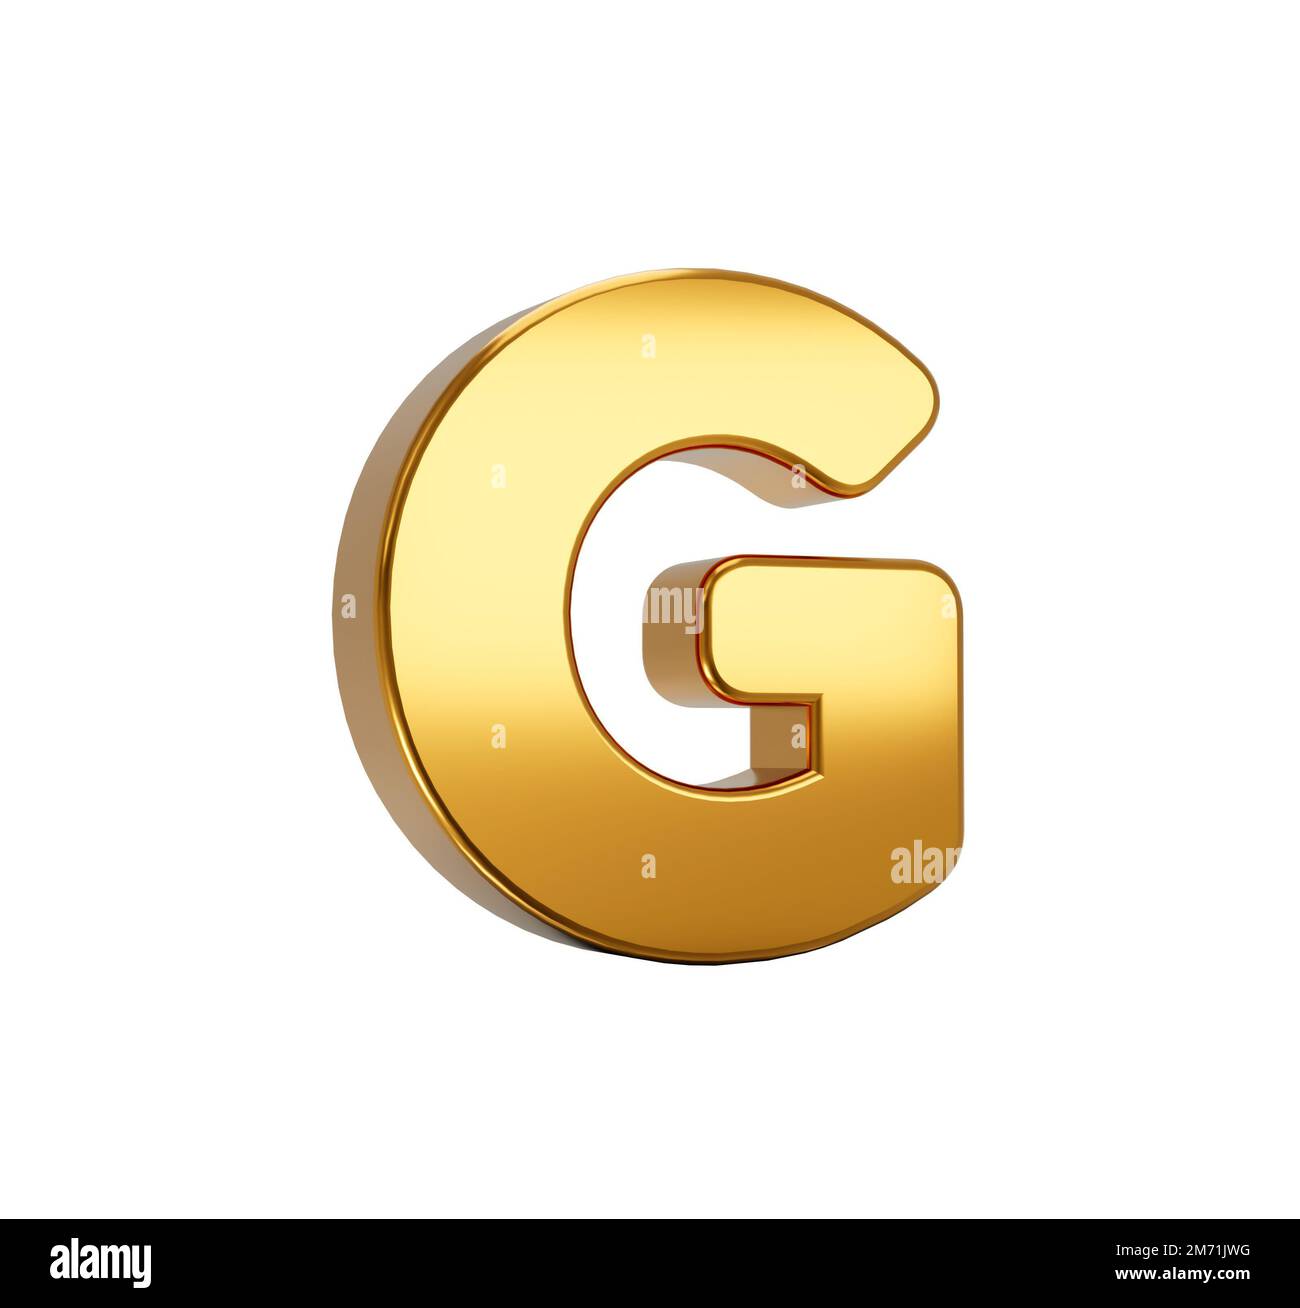 A 3D rendering of gold alphabet capital letter G isolated on white background Stock Photo